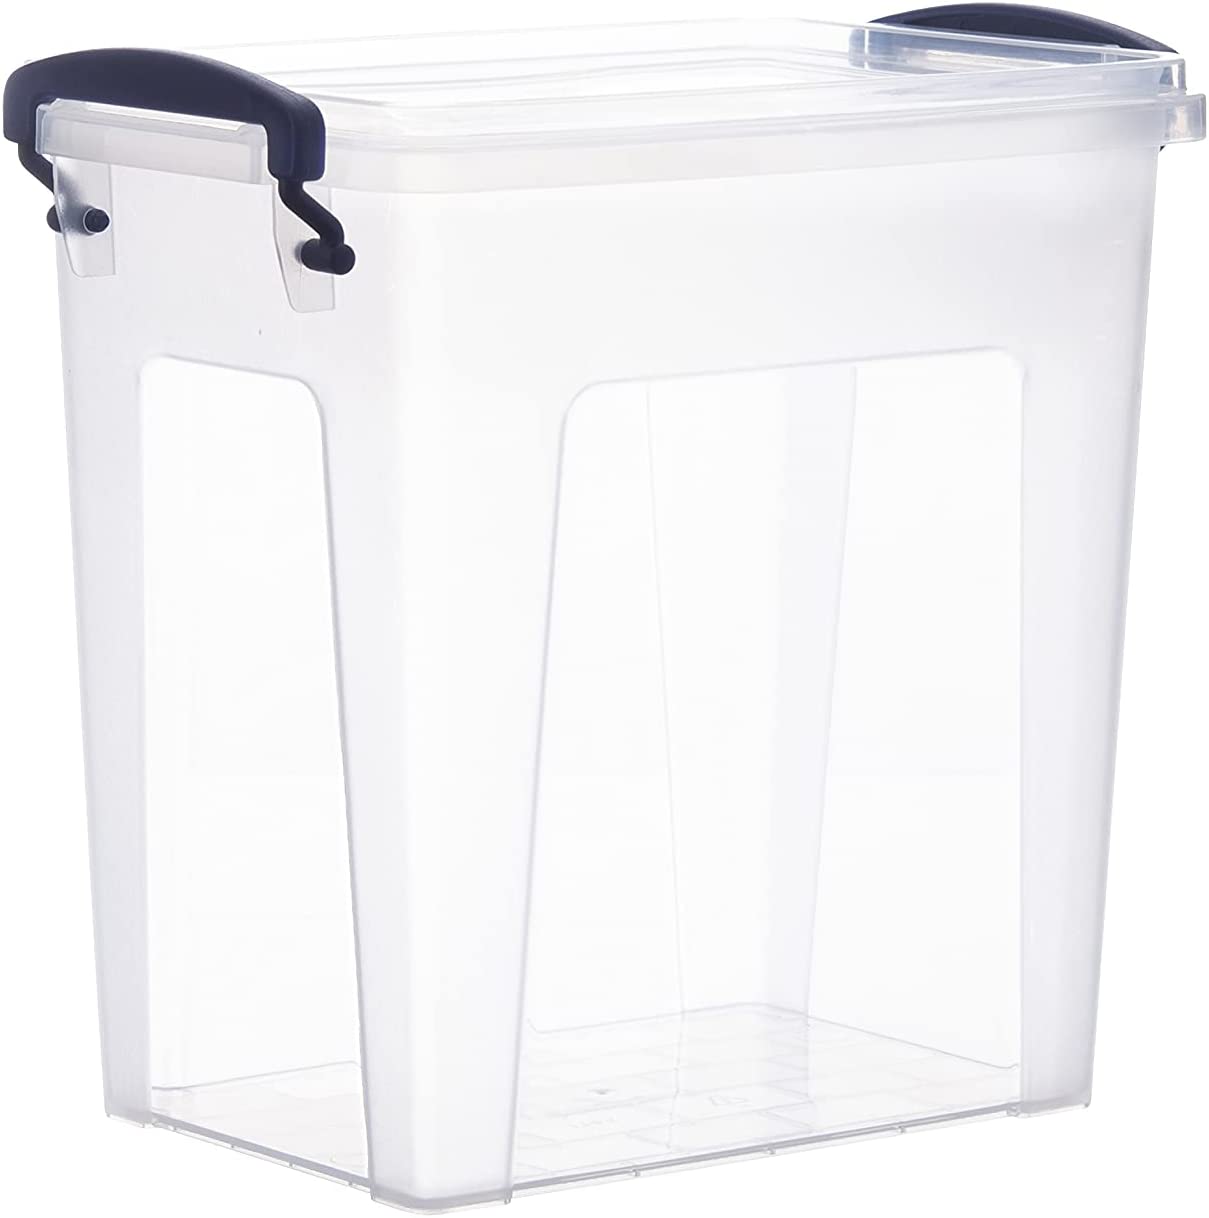 Superio Brand 0.93 Gallon Deep Plastic Storage Bins with Lid, Clear - image 5 of 6